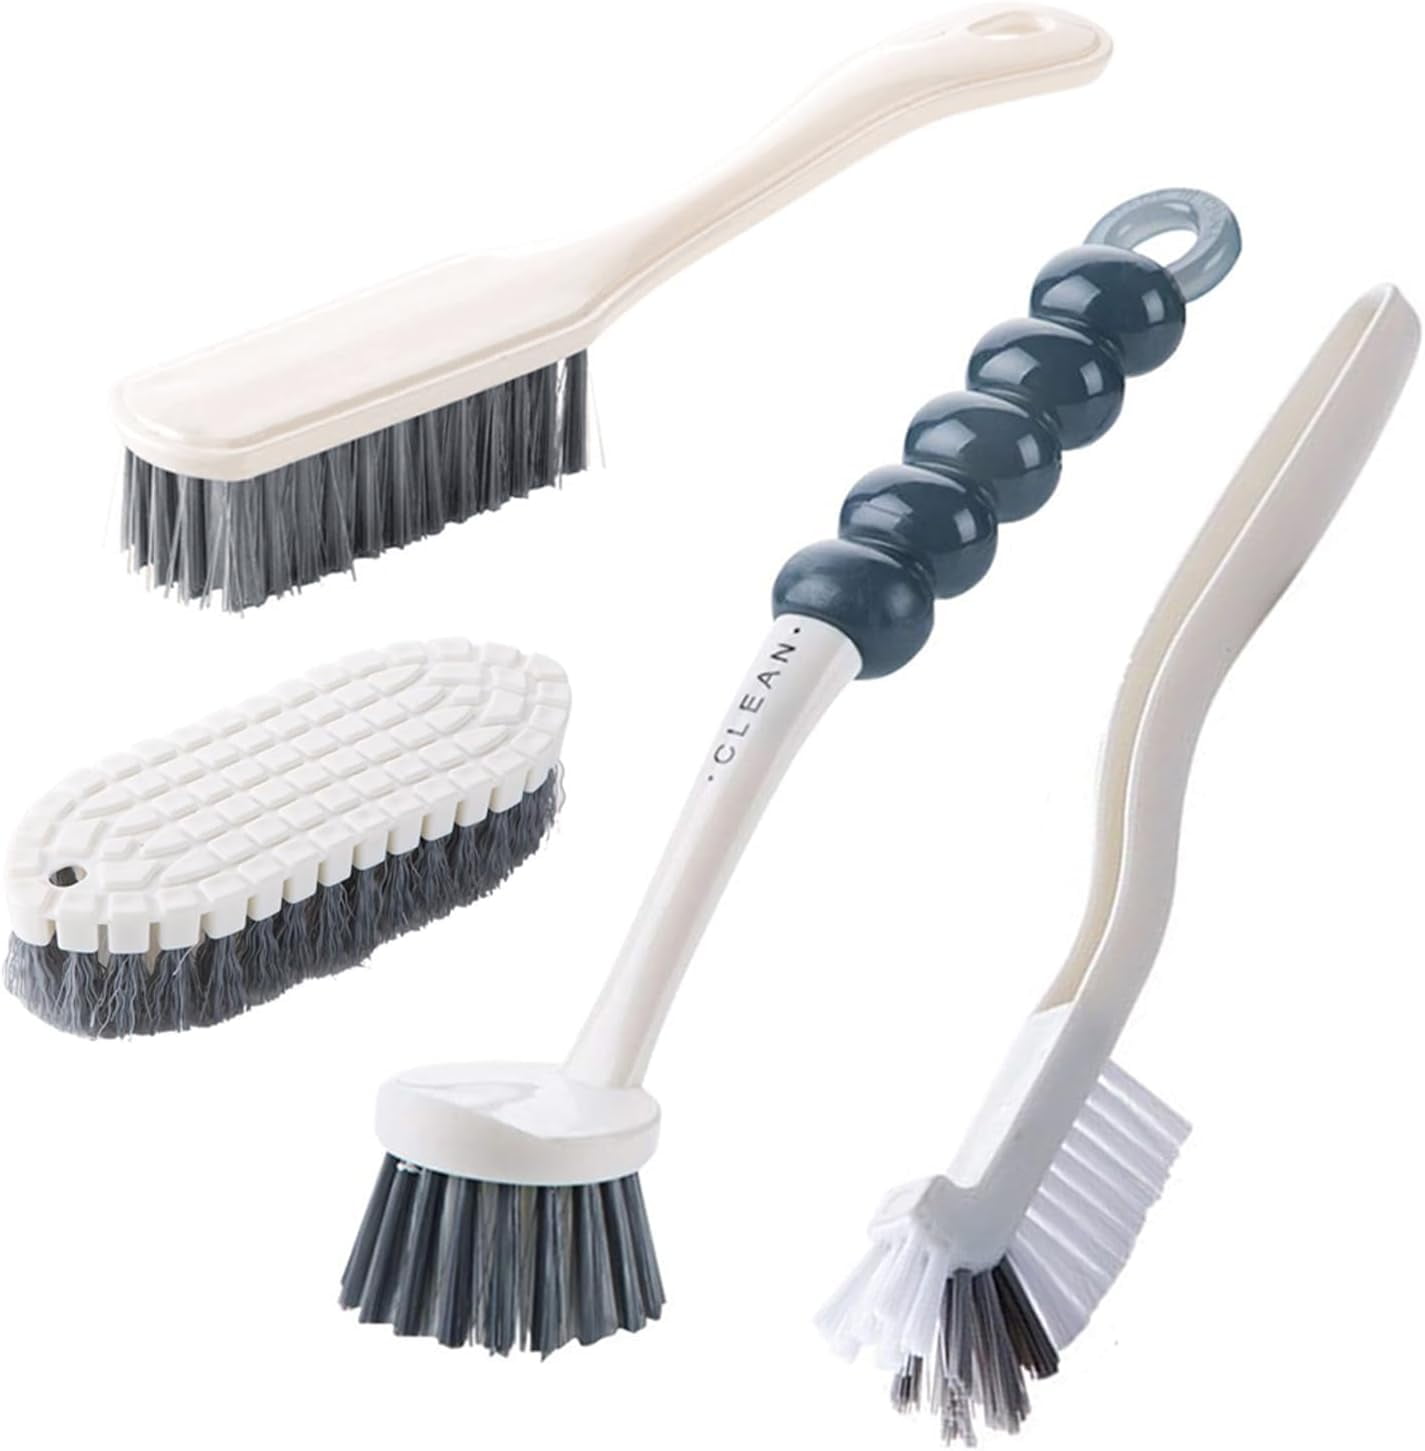 Multi-use cleaning brush – Shop Gadgets